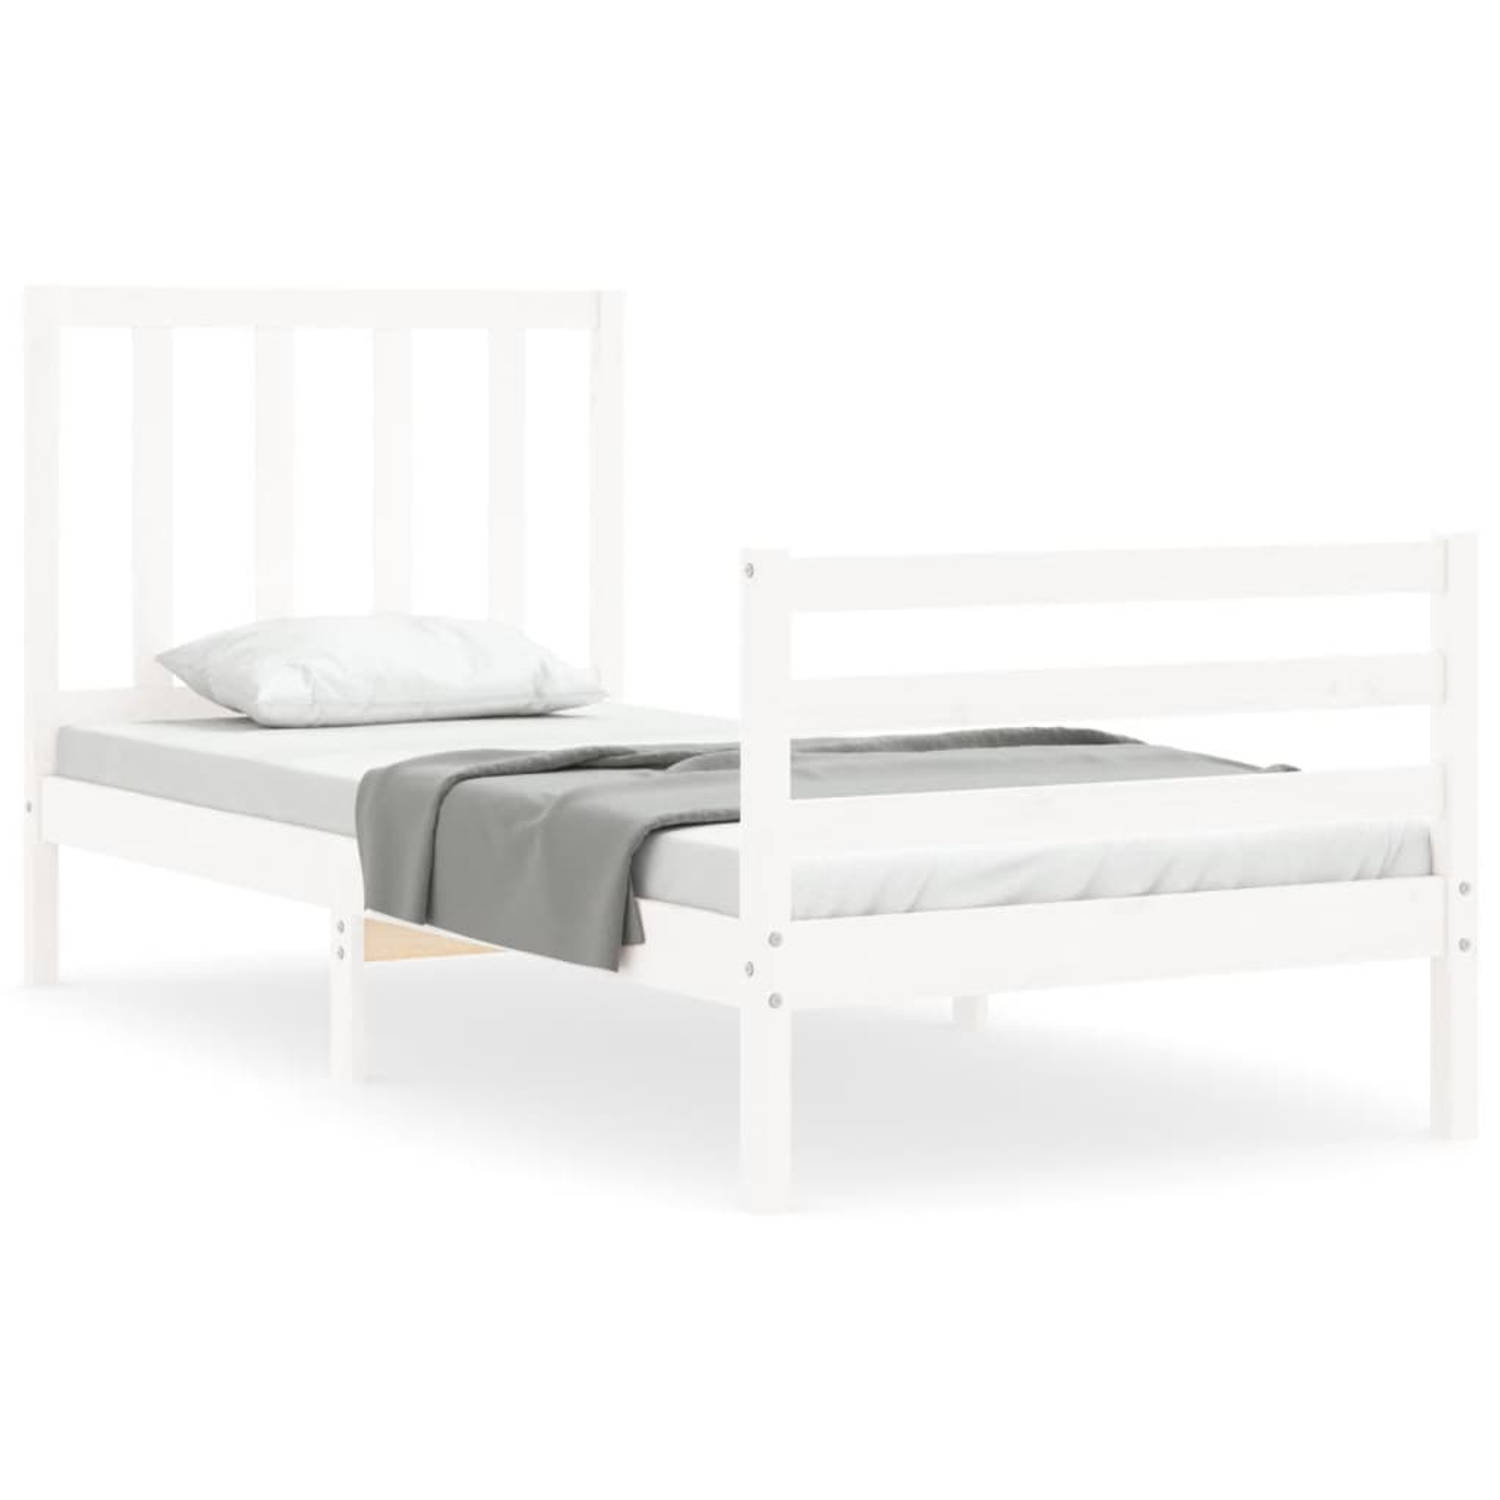 The Living Store Bedframe - Massief grenenhout - 100 x 200 cm - Wit